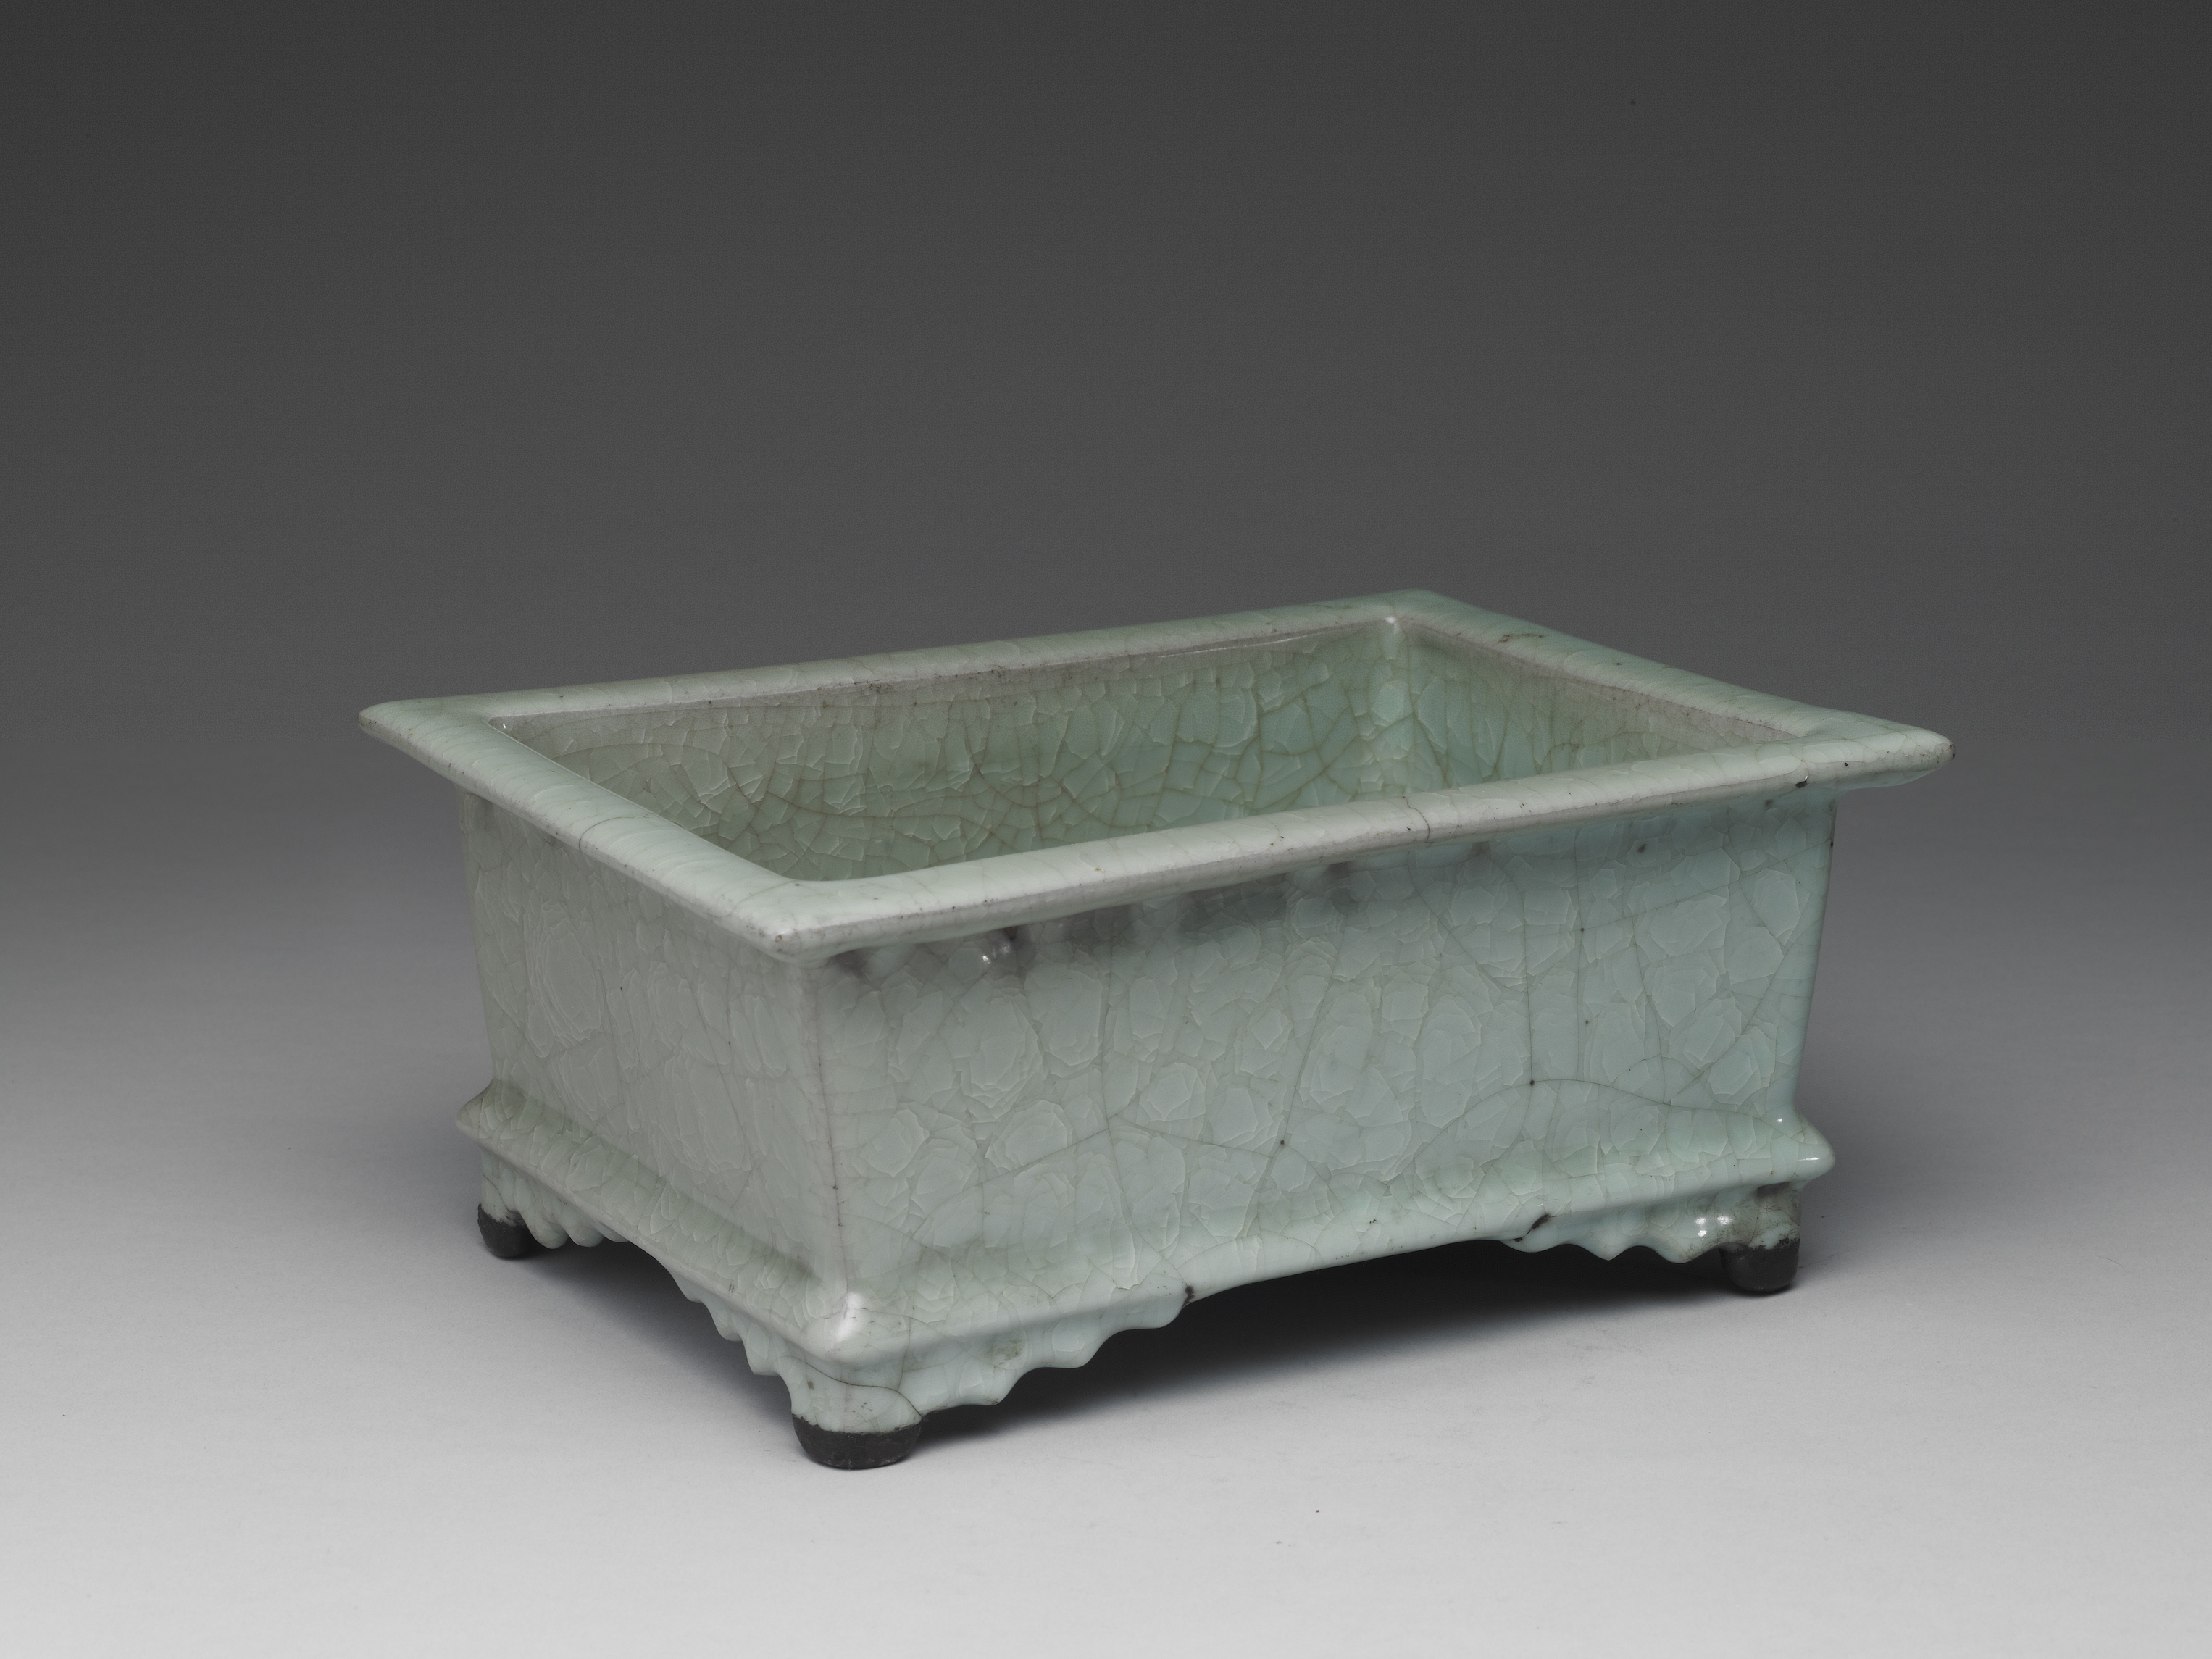 Rectangular basin with celadon glaze
Guan ware, Southern Song dynasty, 12th-13th century
